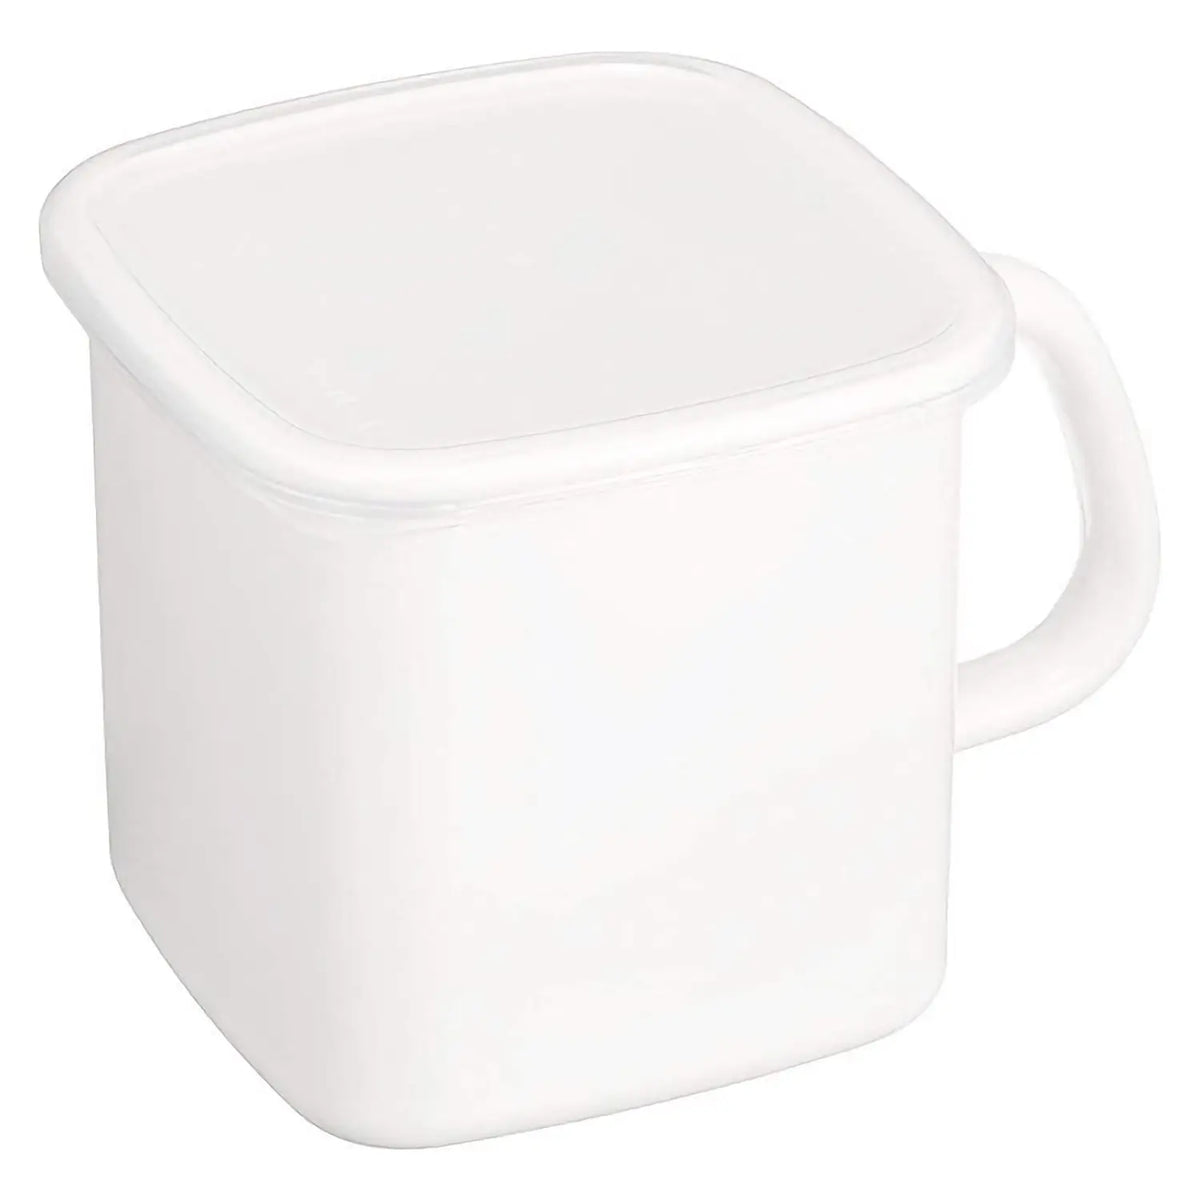 Noda Horo White Series Enamel Square Food Containers with Handle and Lid 1.2L